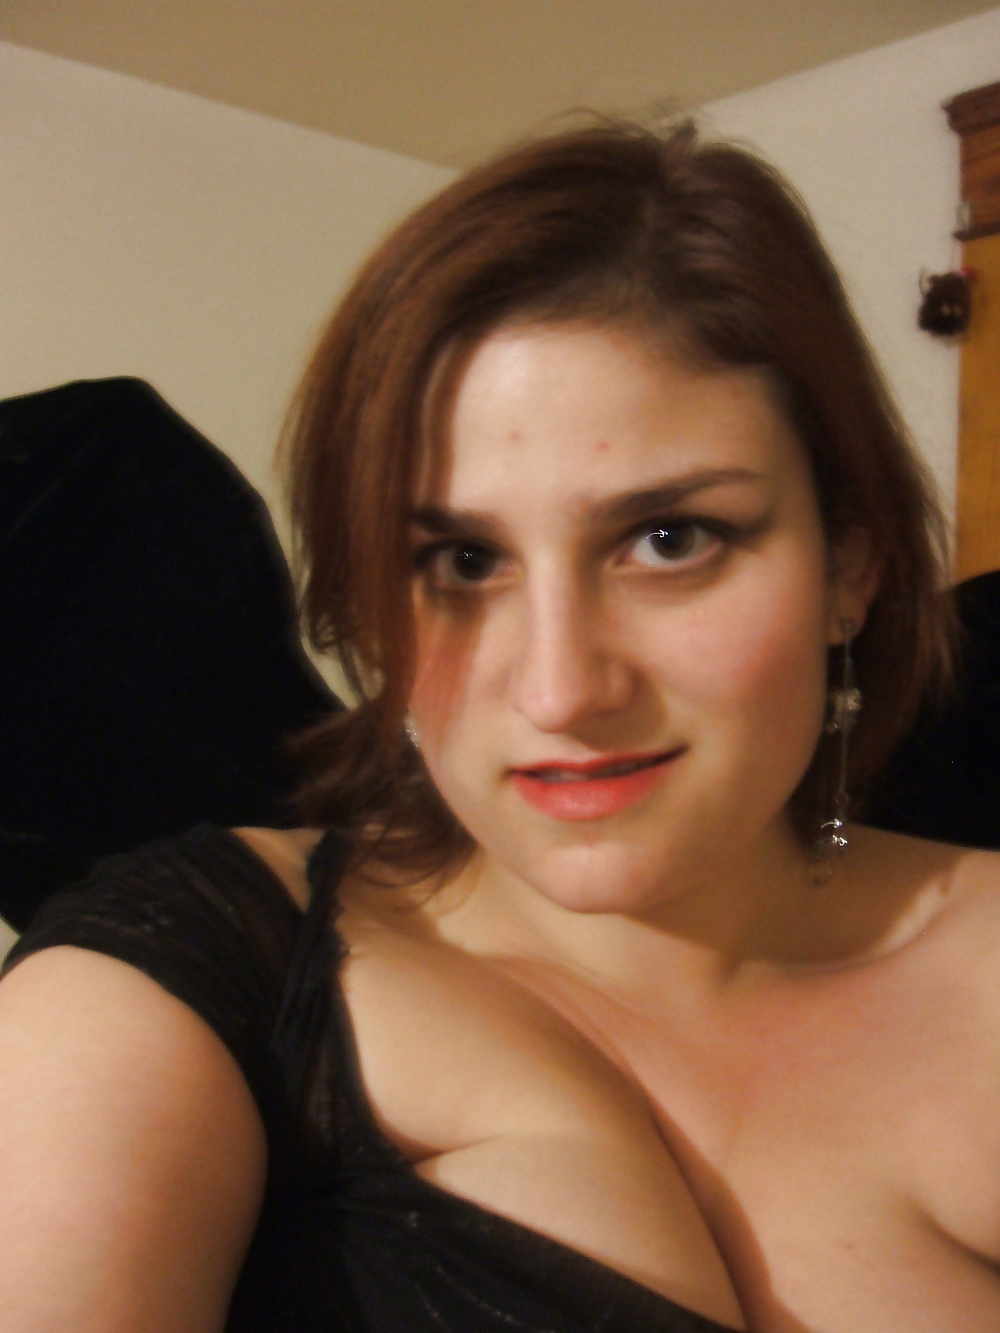 More Chubby Housewife by Request - Comments? #4566356